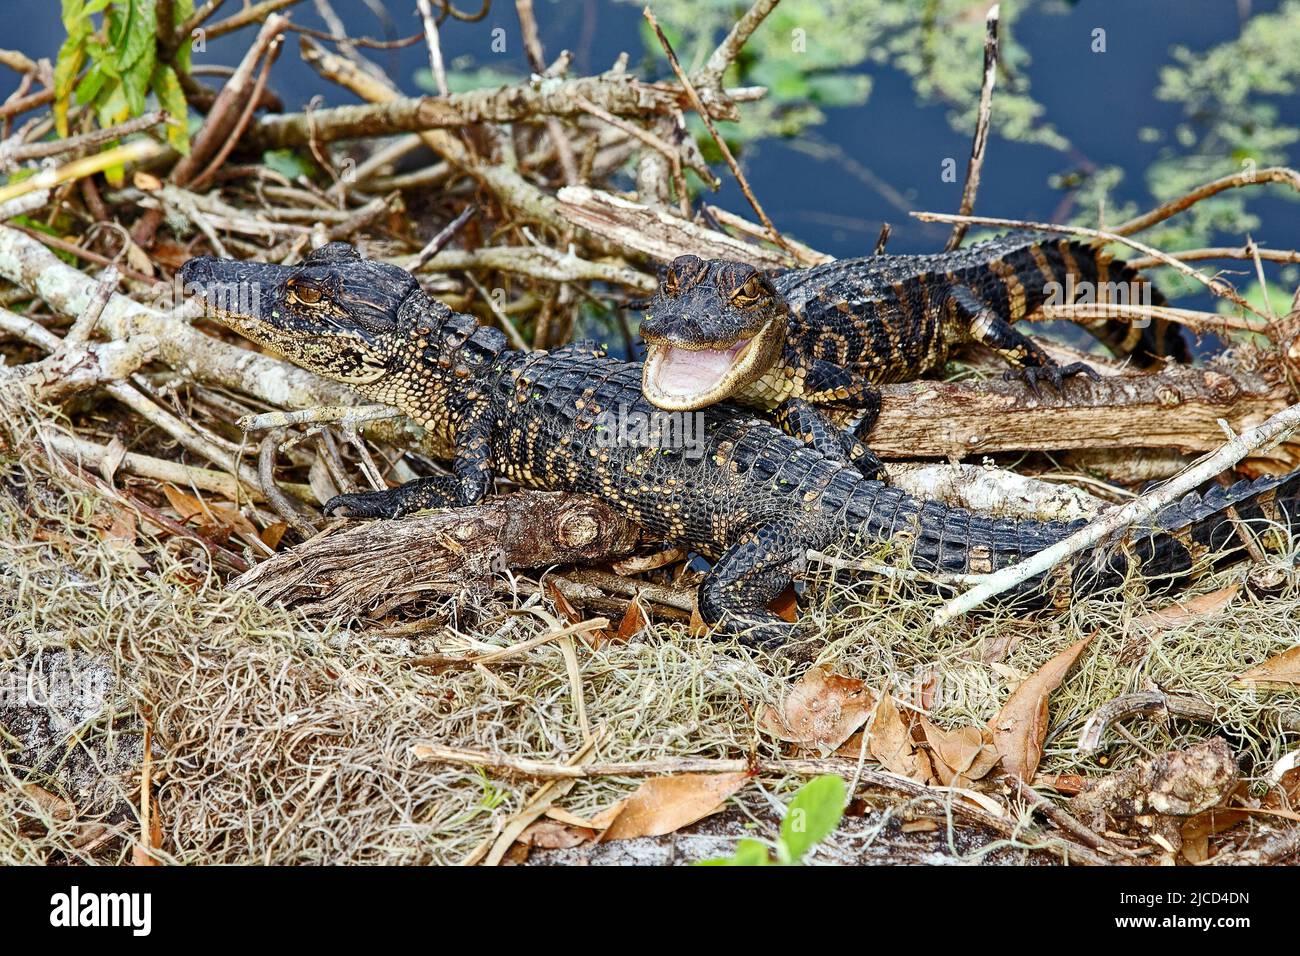 2 American alligators; young, spots, mouth open, small sharp teeth, rough skin, resting, nature; wildlife; close-up, animal, Alligator mississippiensi Stock Photo